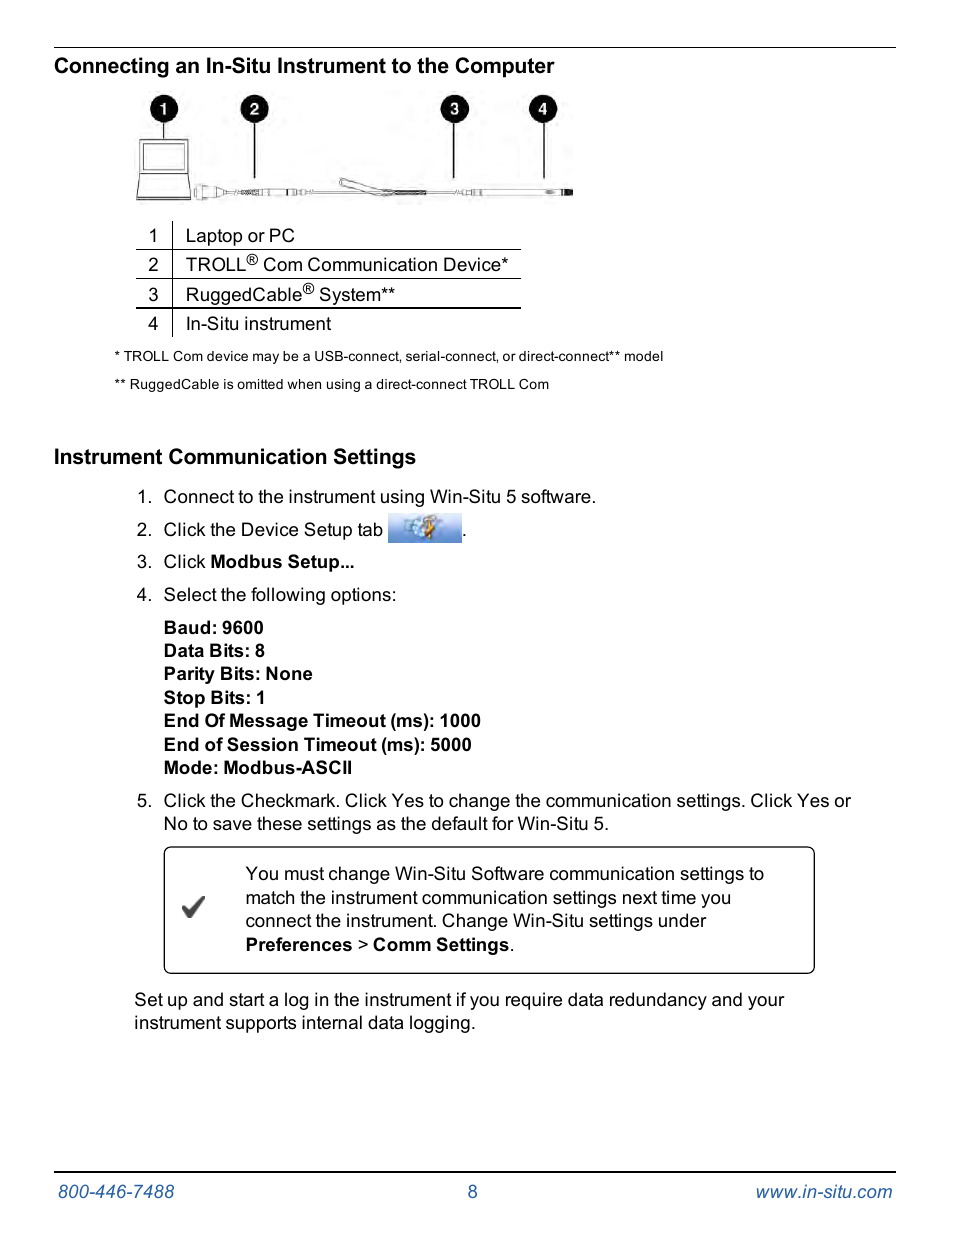 Connecting an in-situ instrument to the computer, Instrument communication  settings | In-Situ Tube 300R Telemetry System User Manual | Page 8 / 44